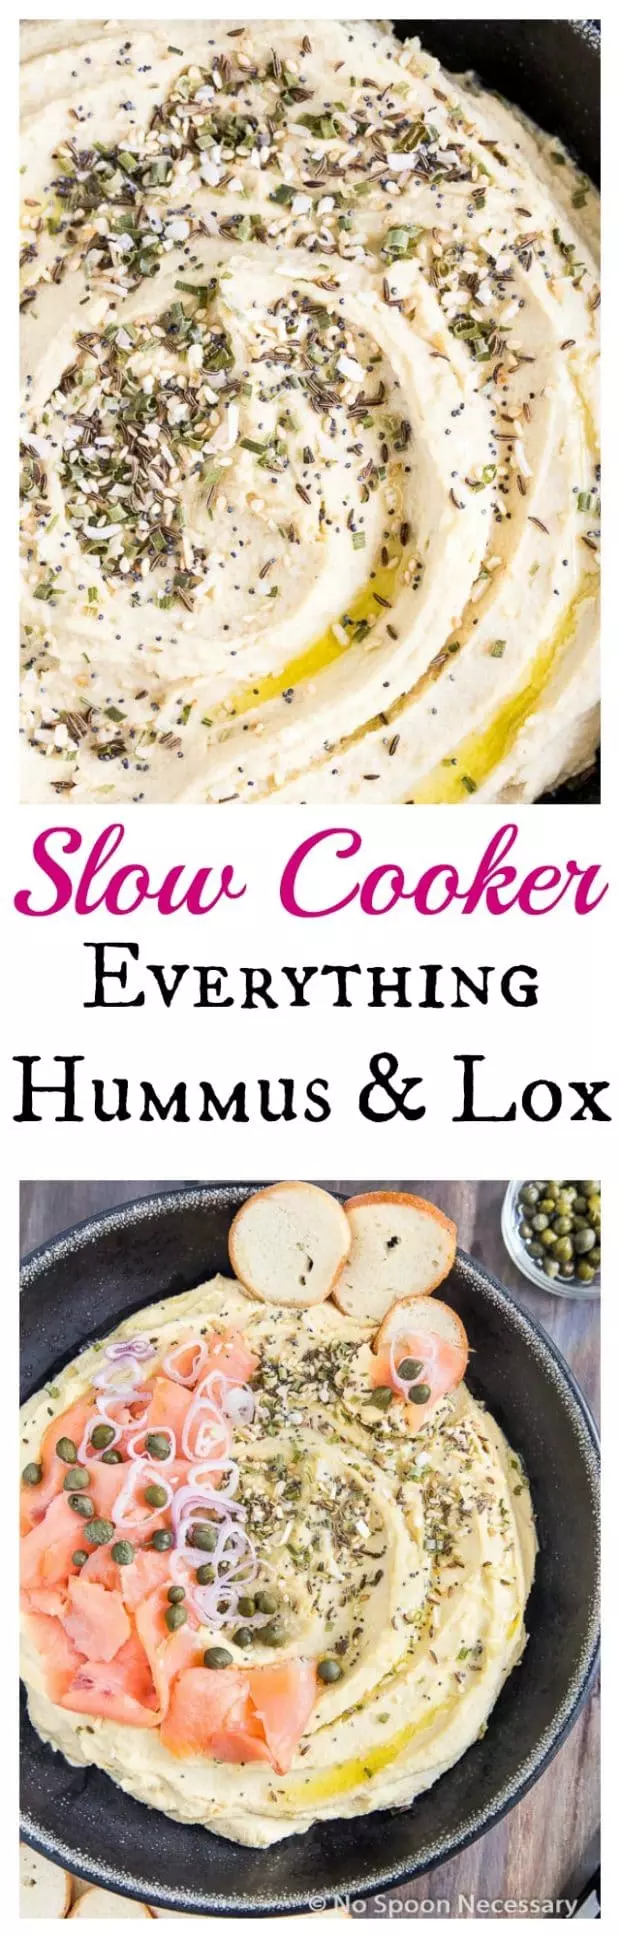 Slow Cooker Everything Hummus & Lox